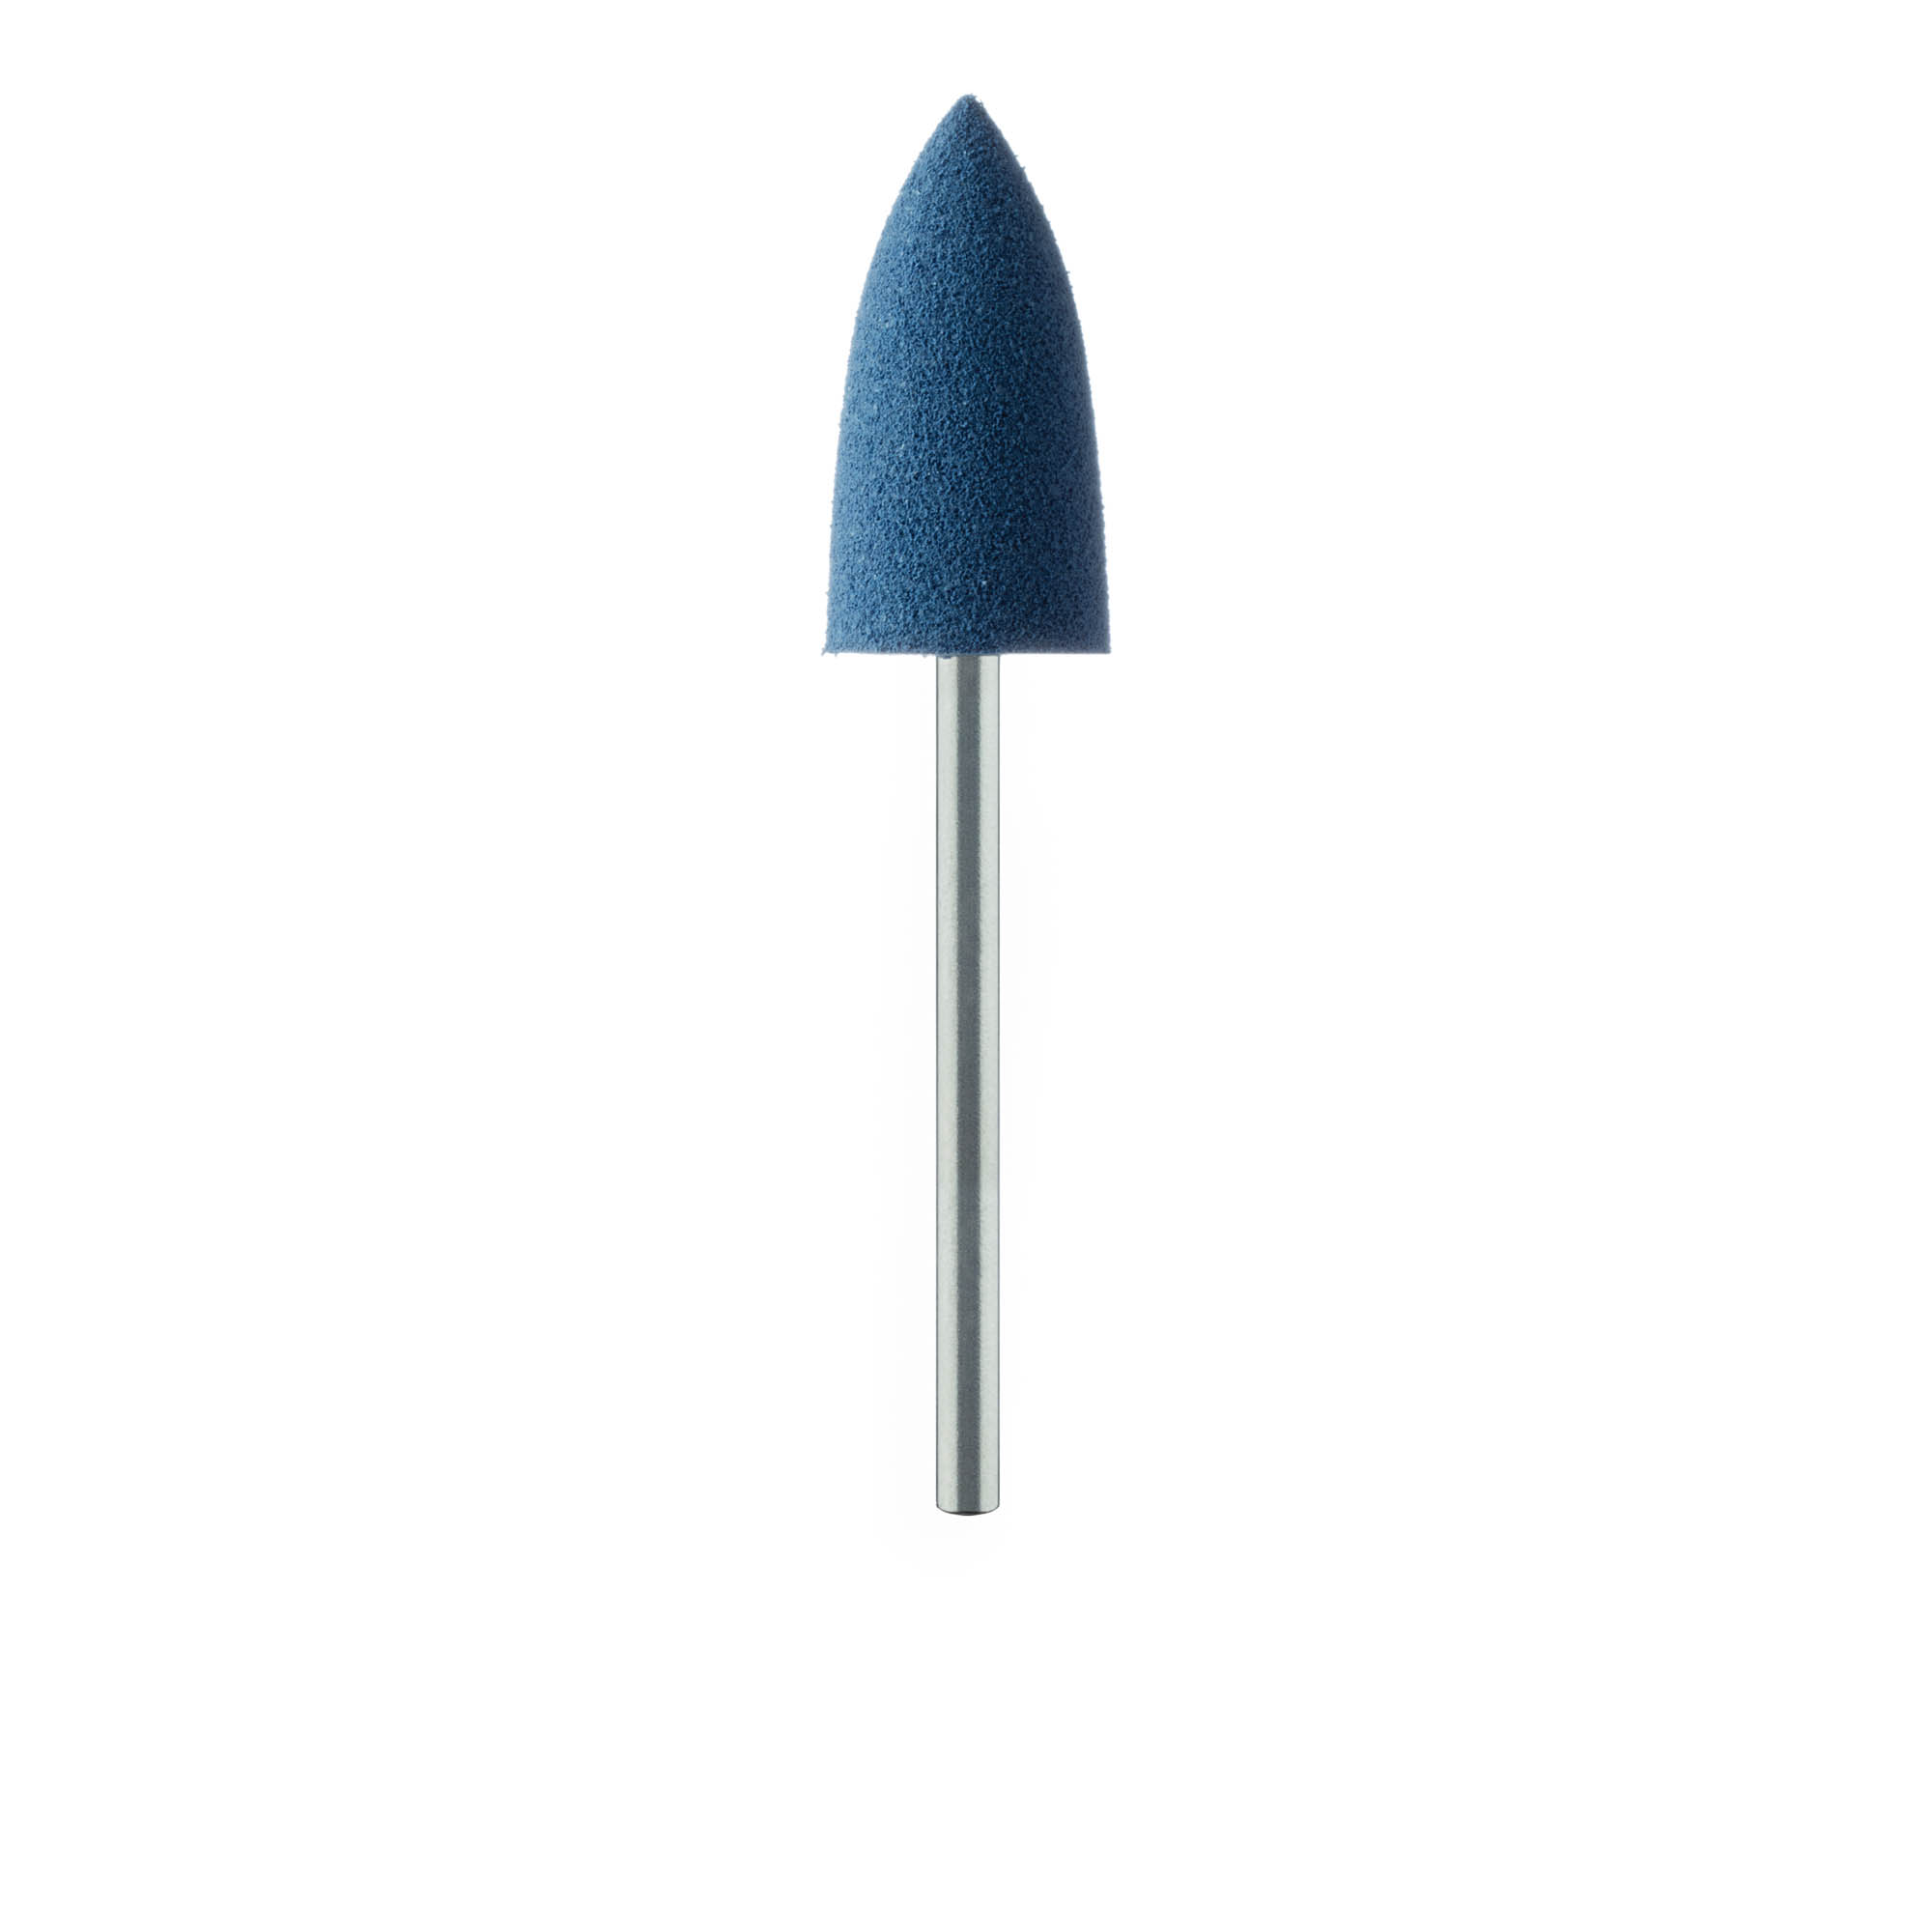 9579S-100-HP-BLUE Polisher, Silicone Polishers with Aluminum Oxide, Blue Point, Pre-Polishing, 10mm Ø, (Coarse), HP